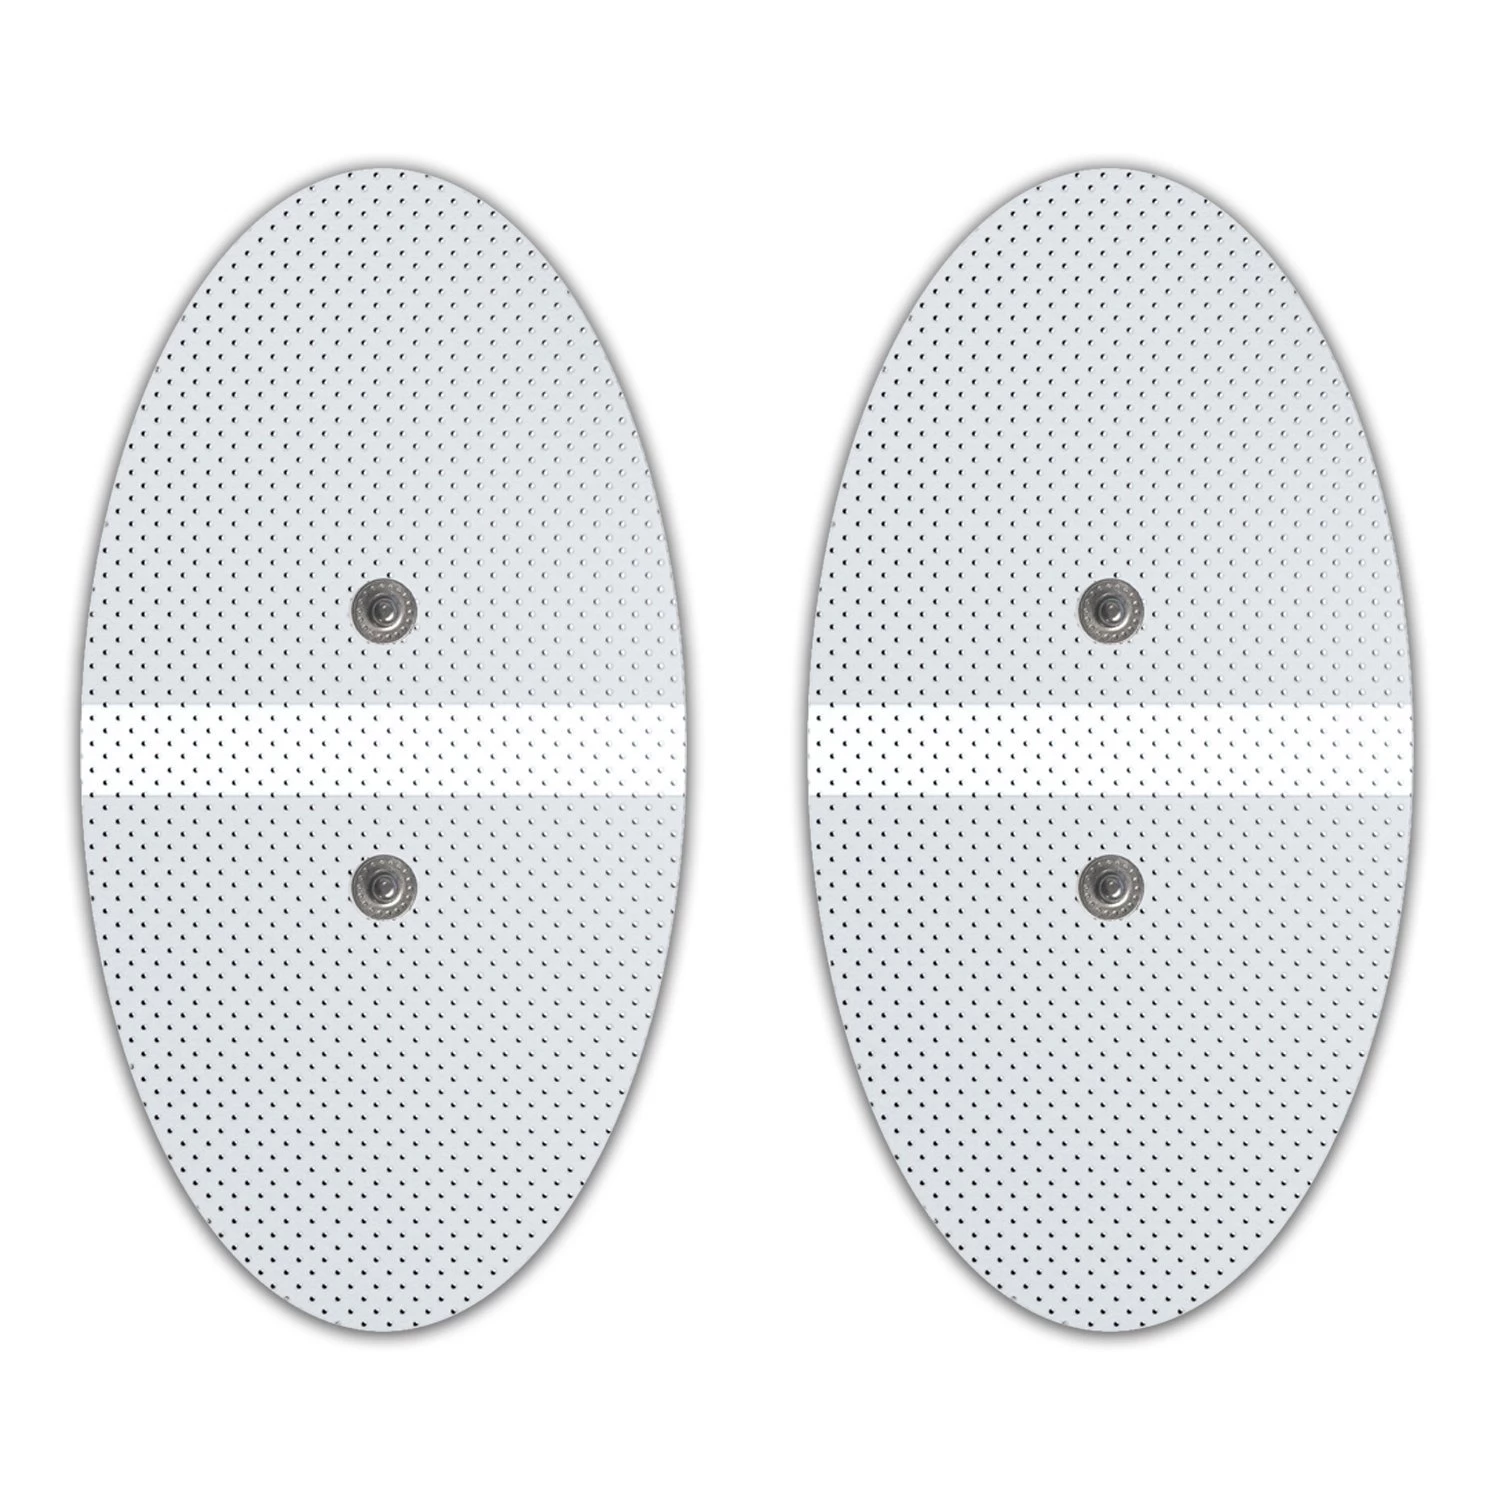 2 Pairs (4 Pcs) White Large Oval Electrode Patches Pads For Wi9 - HealthmateForever.com